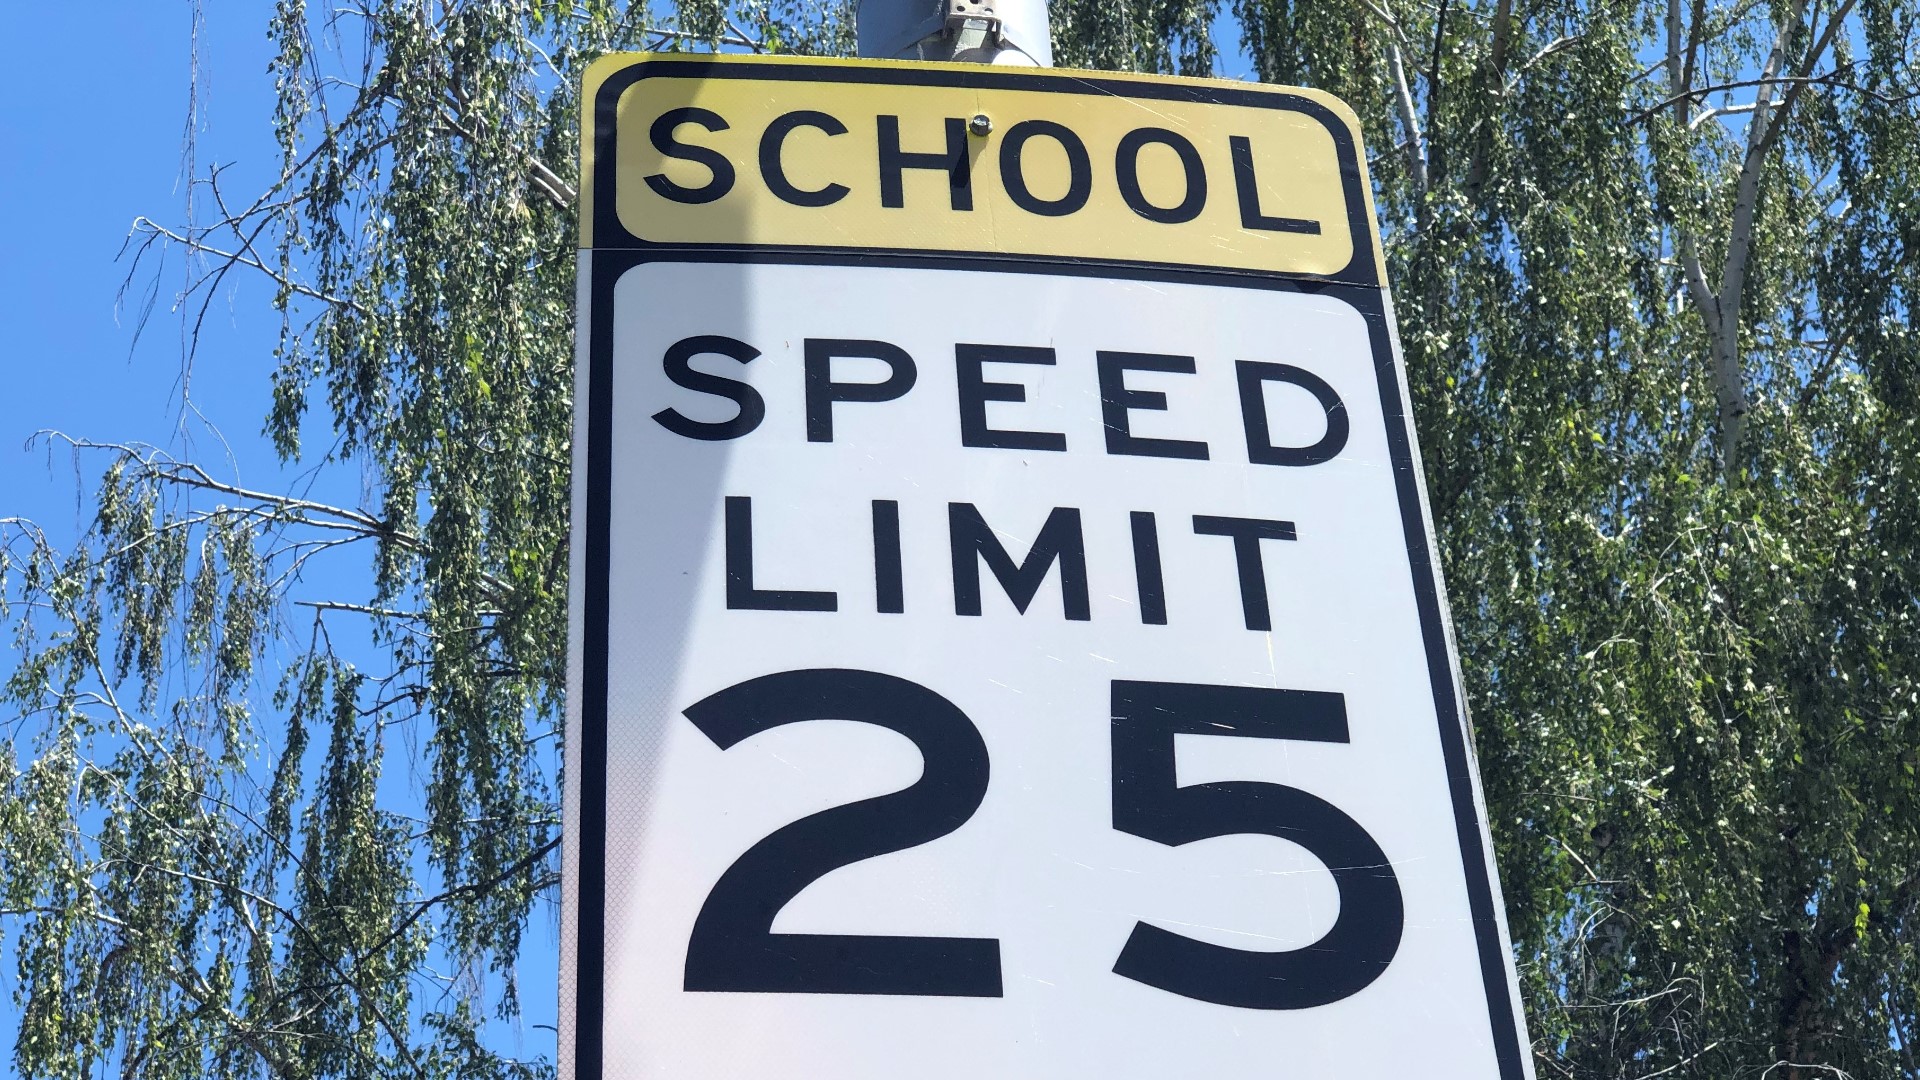 Sacramento ranked at #1 for the most traffic-related pedestrian deaths for people under the age of 15. Now, the City is making an argument drop speed limits near schools to 15 mph.